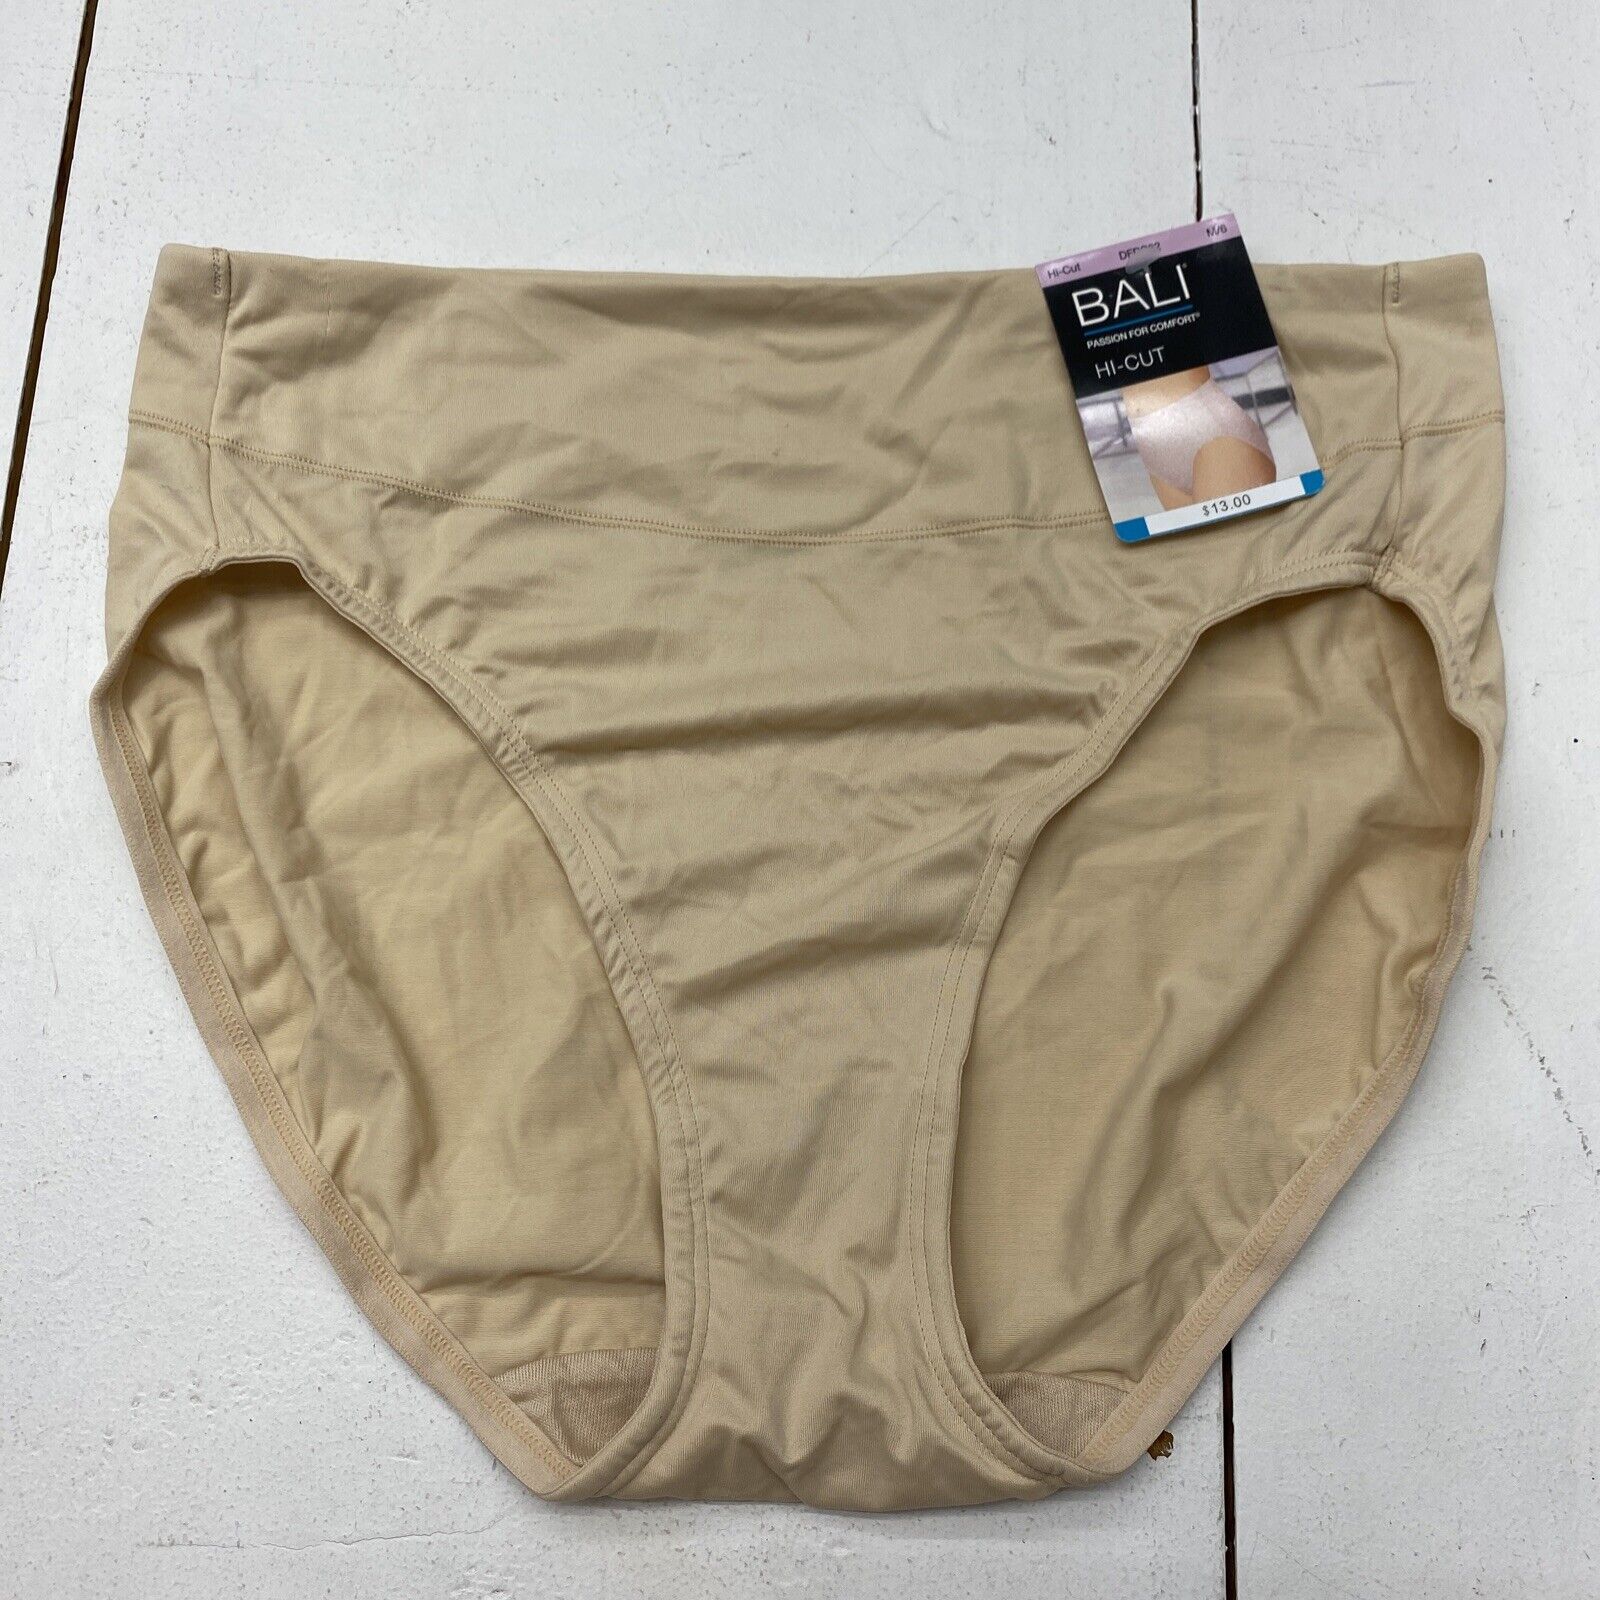 Bali Passion for Comfort Hi-Cut Panty Soft Taupe 6 Women's